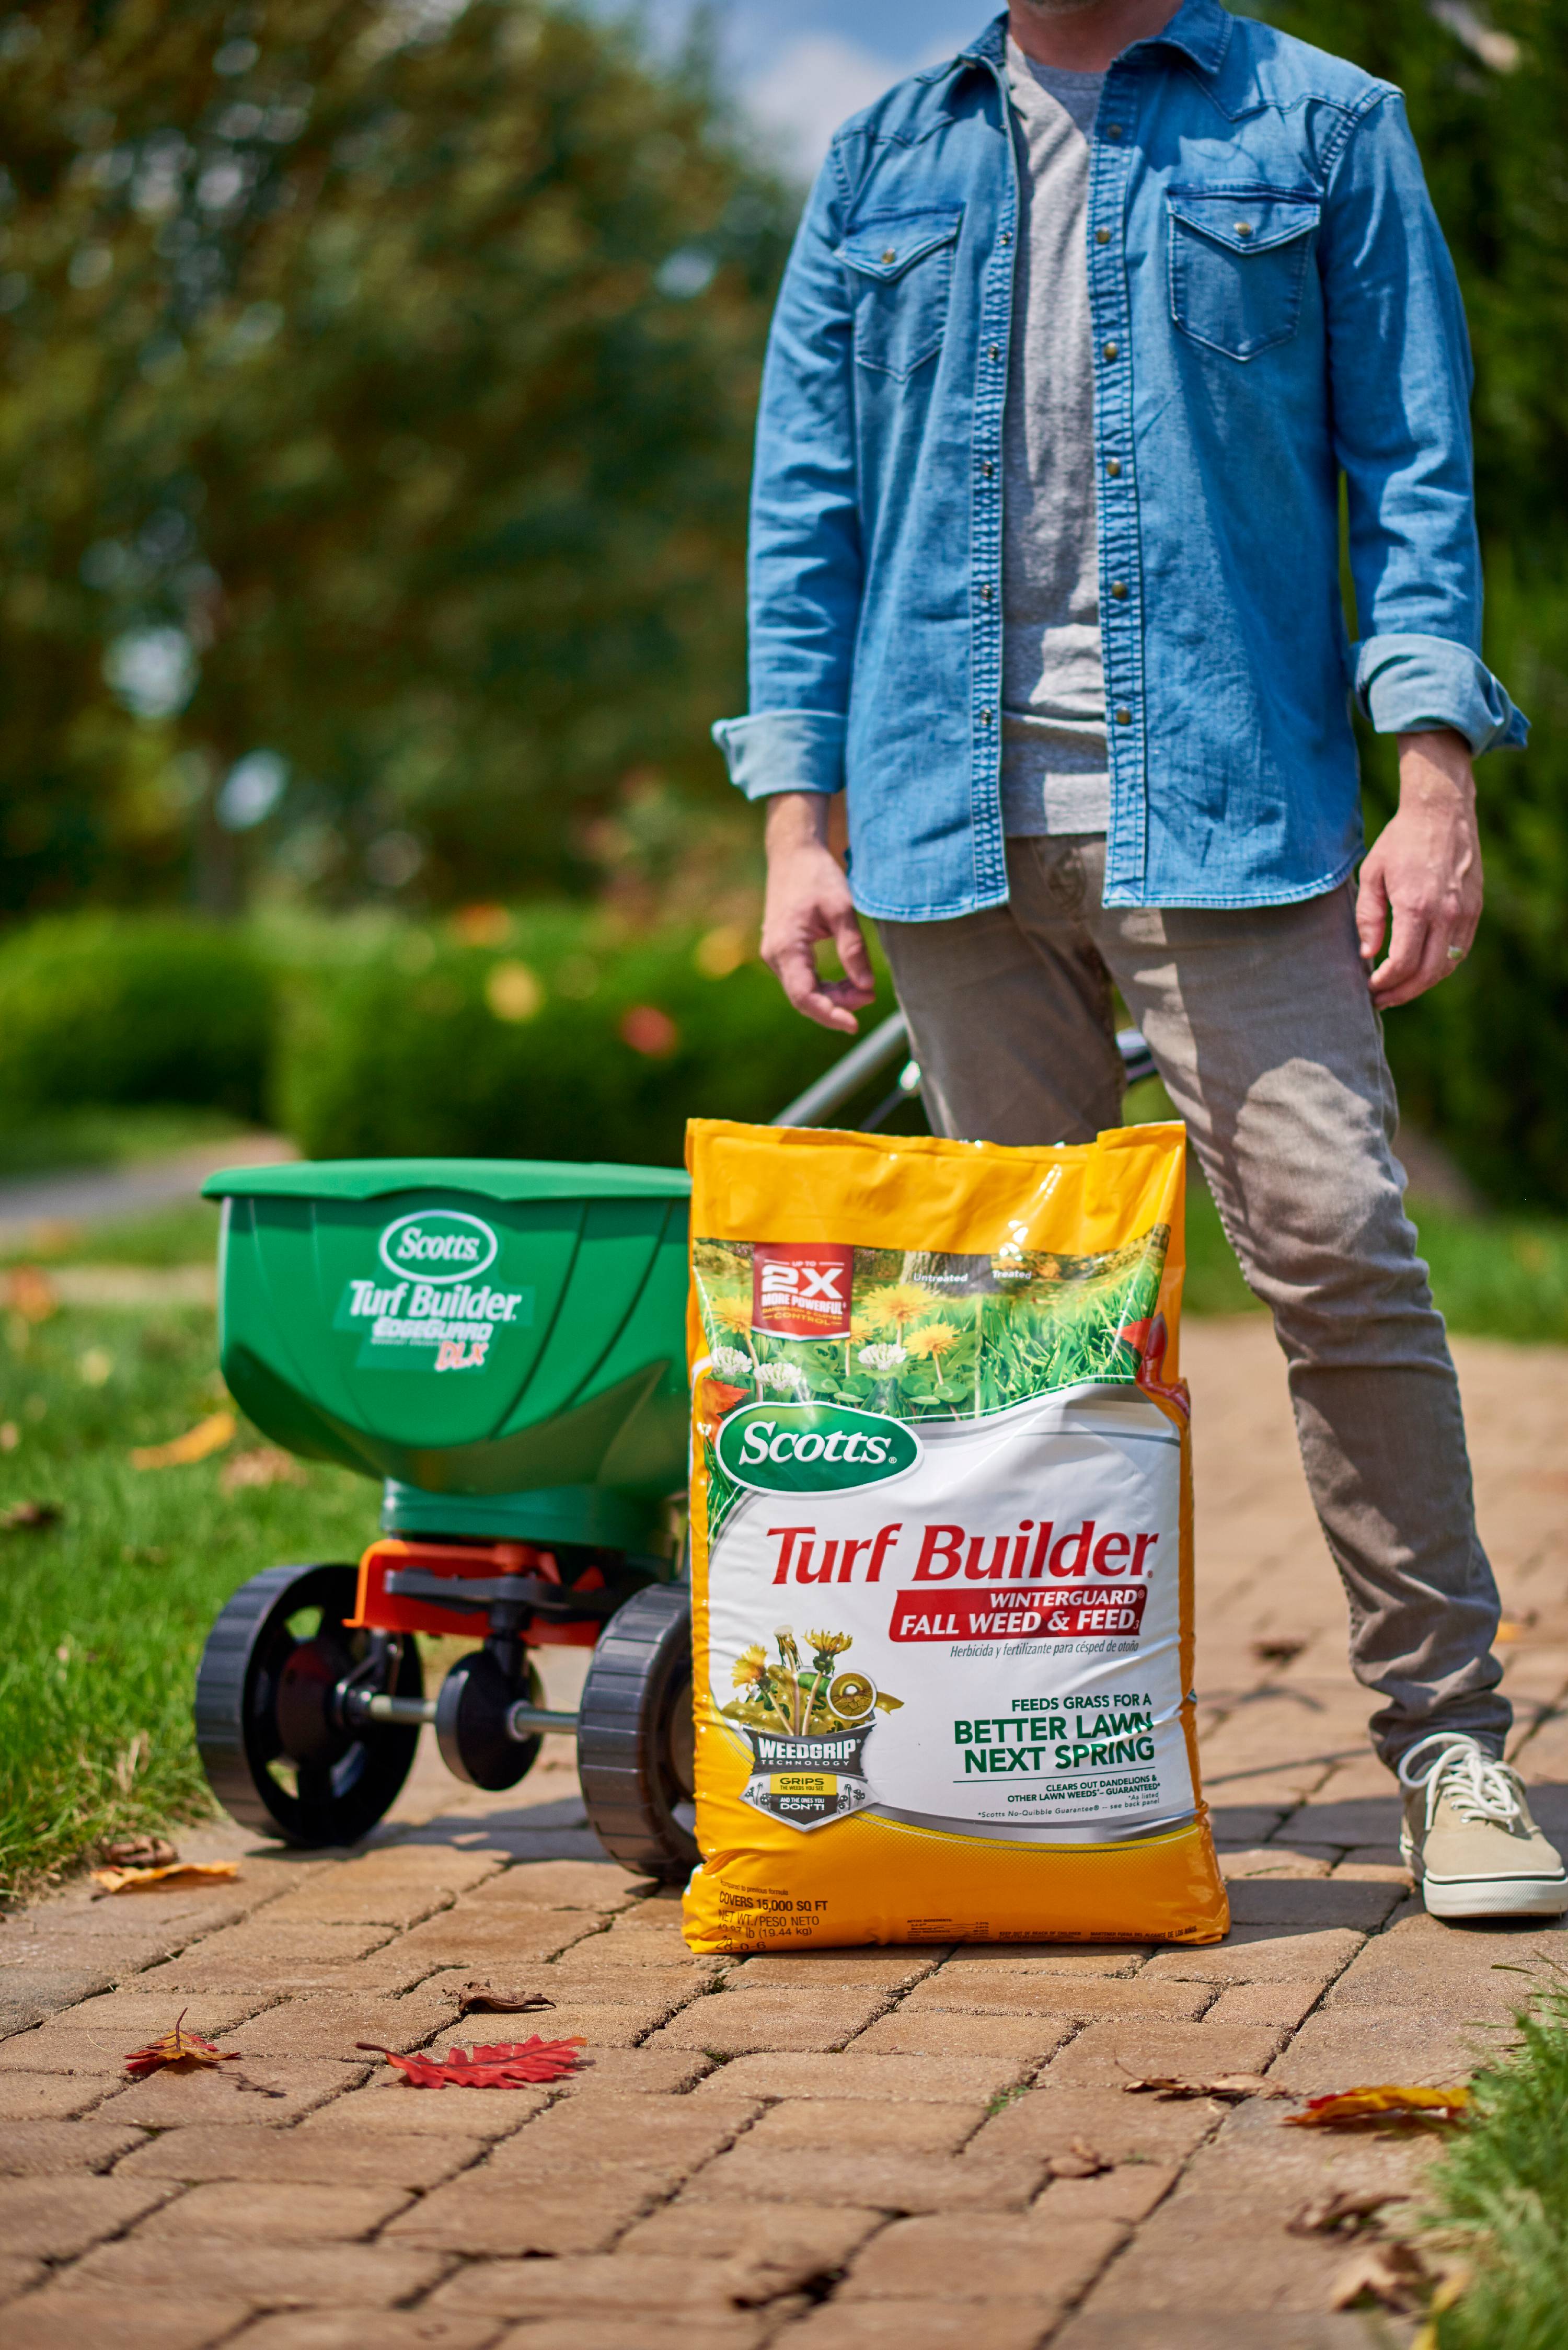 Scotts Turf Builder WinterGuard Fall Weed & Feed3, 14.29 lbs. - image 3 of 10